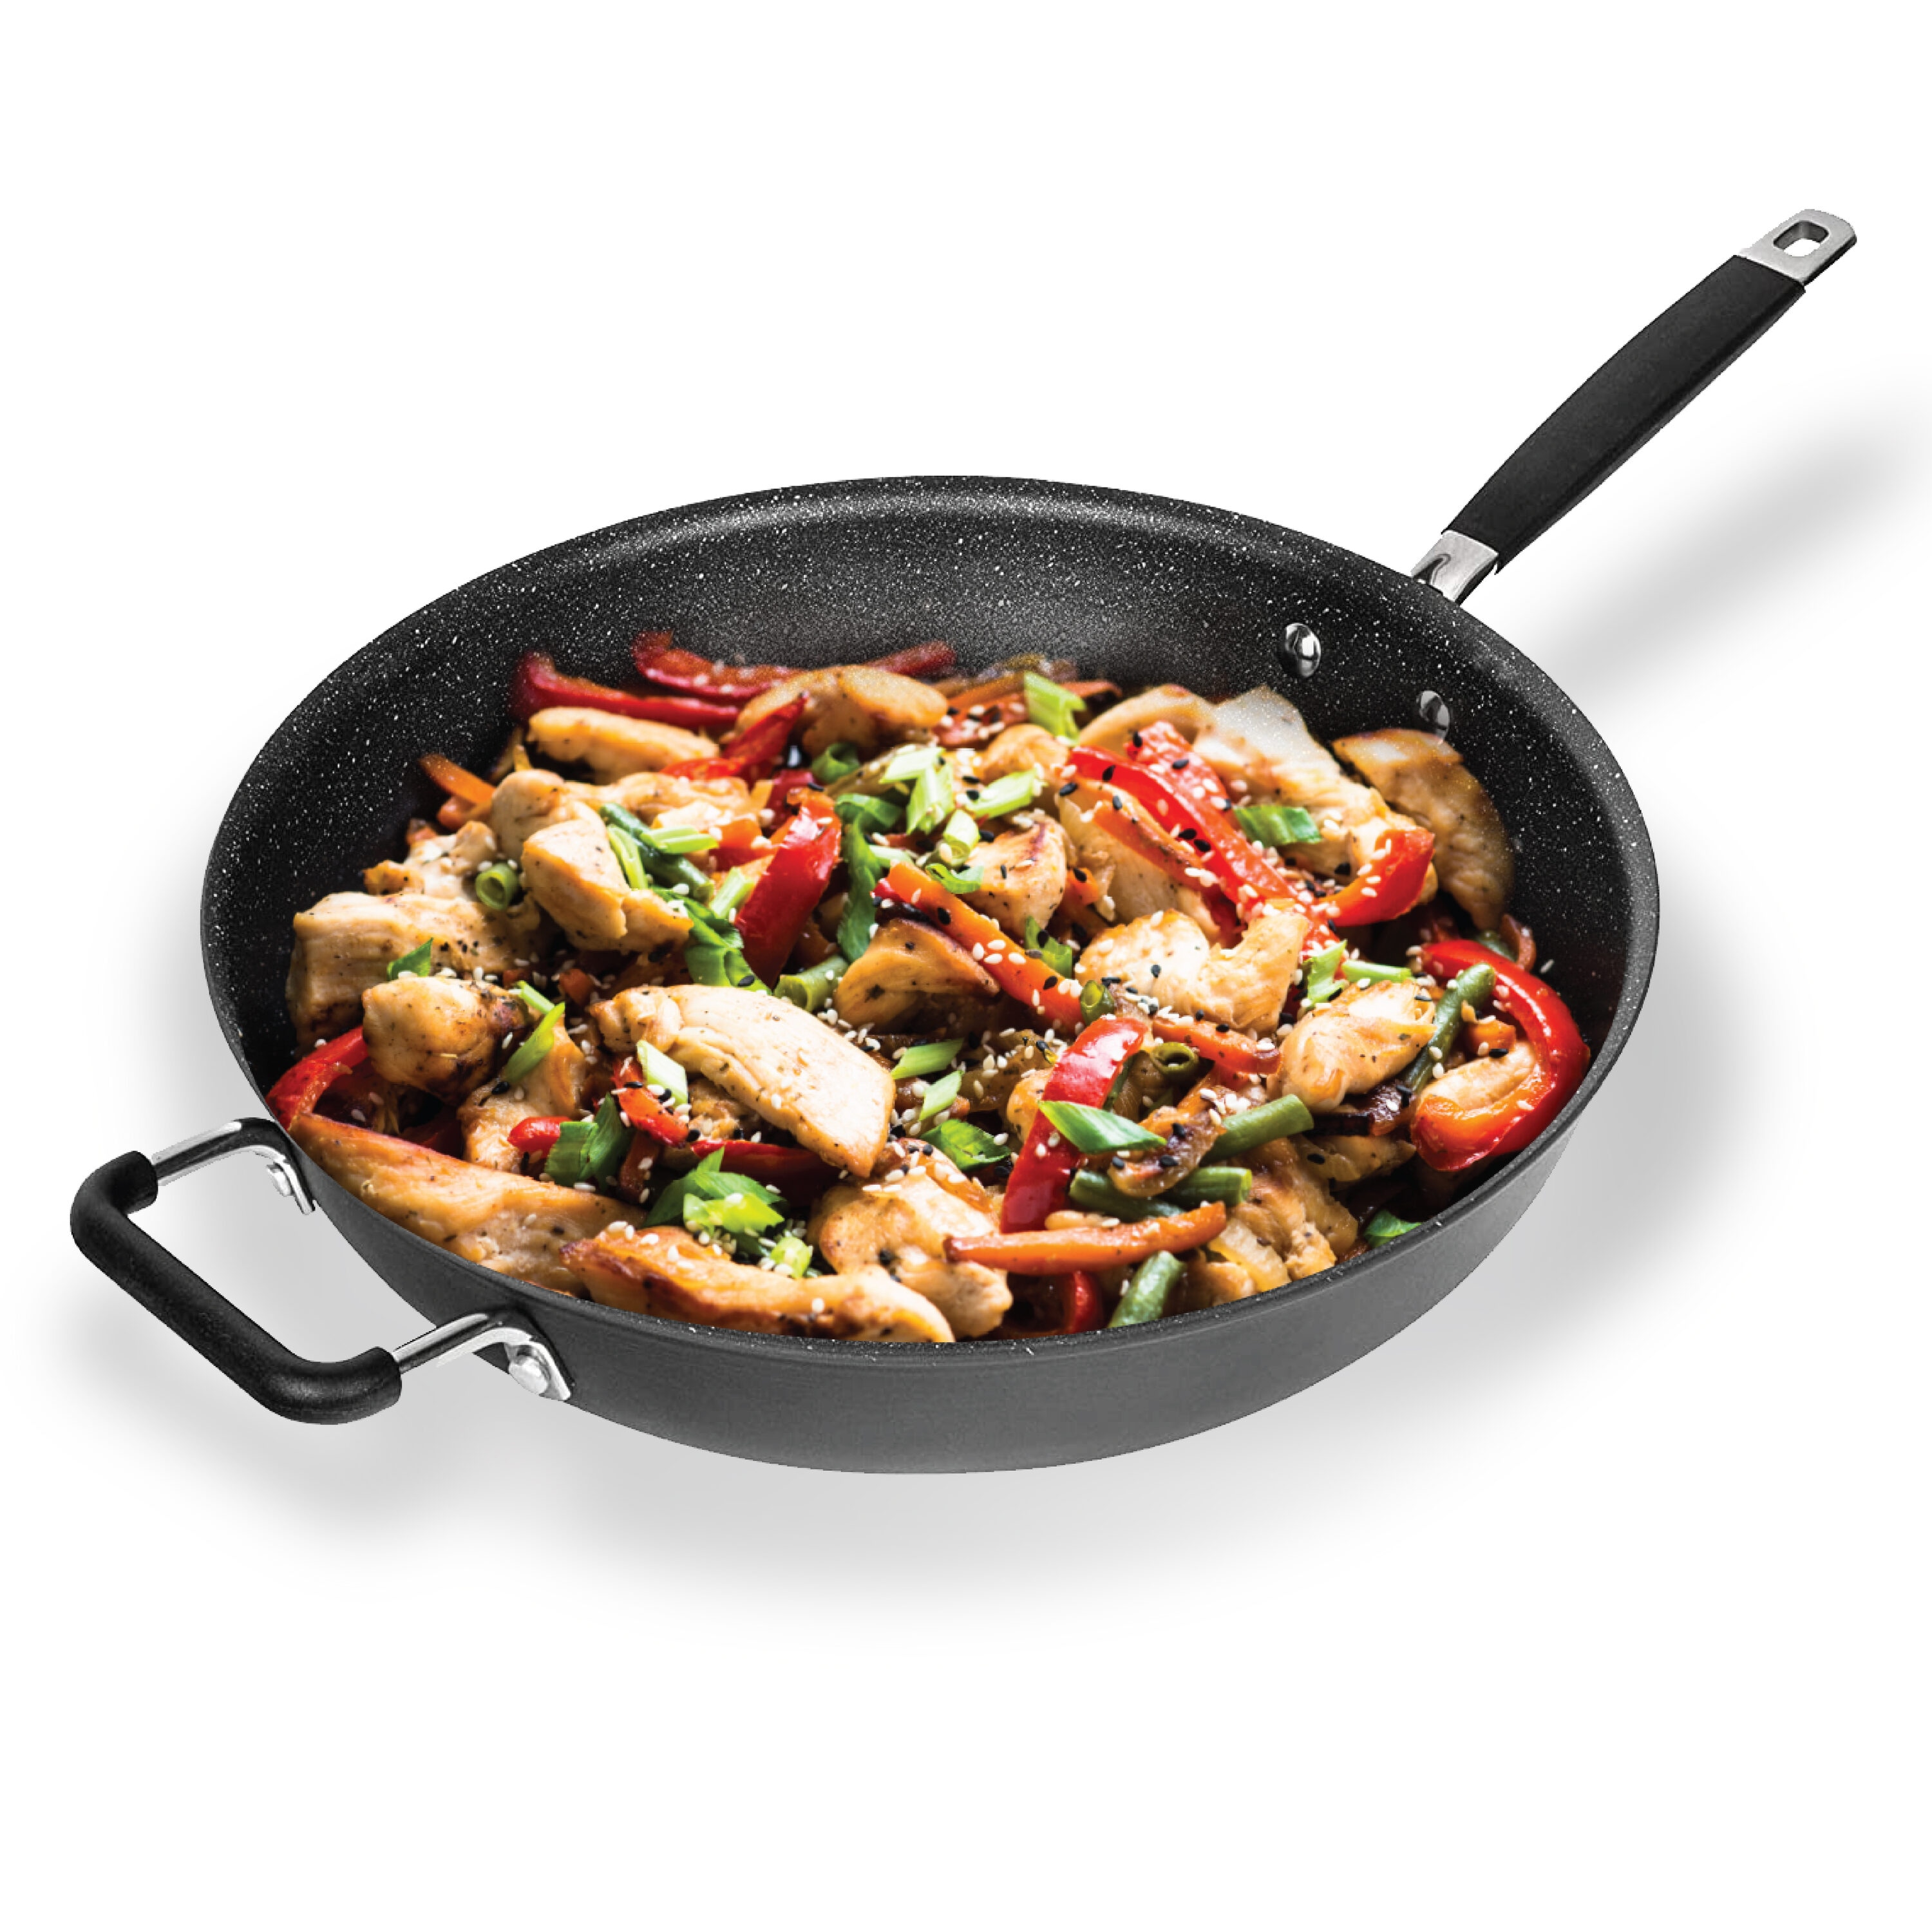 Granitestone Armor Max 12'' Hard Anodized Ultra Durable Nonstick Fry Pan,  Oven & Dishwasher Safe & Reviews